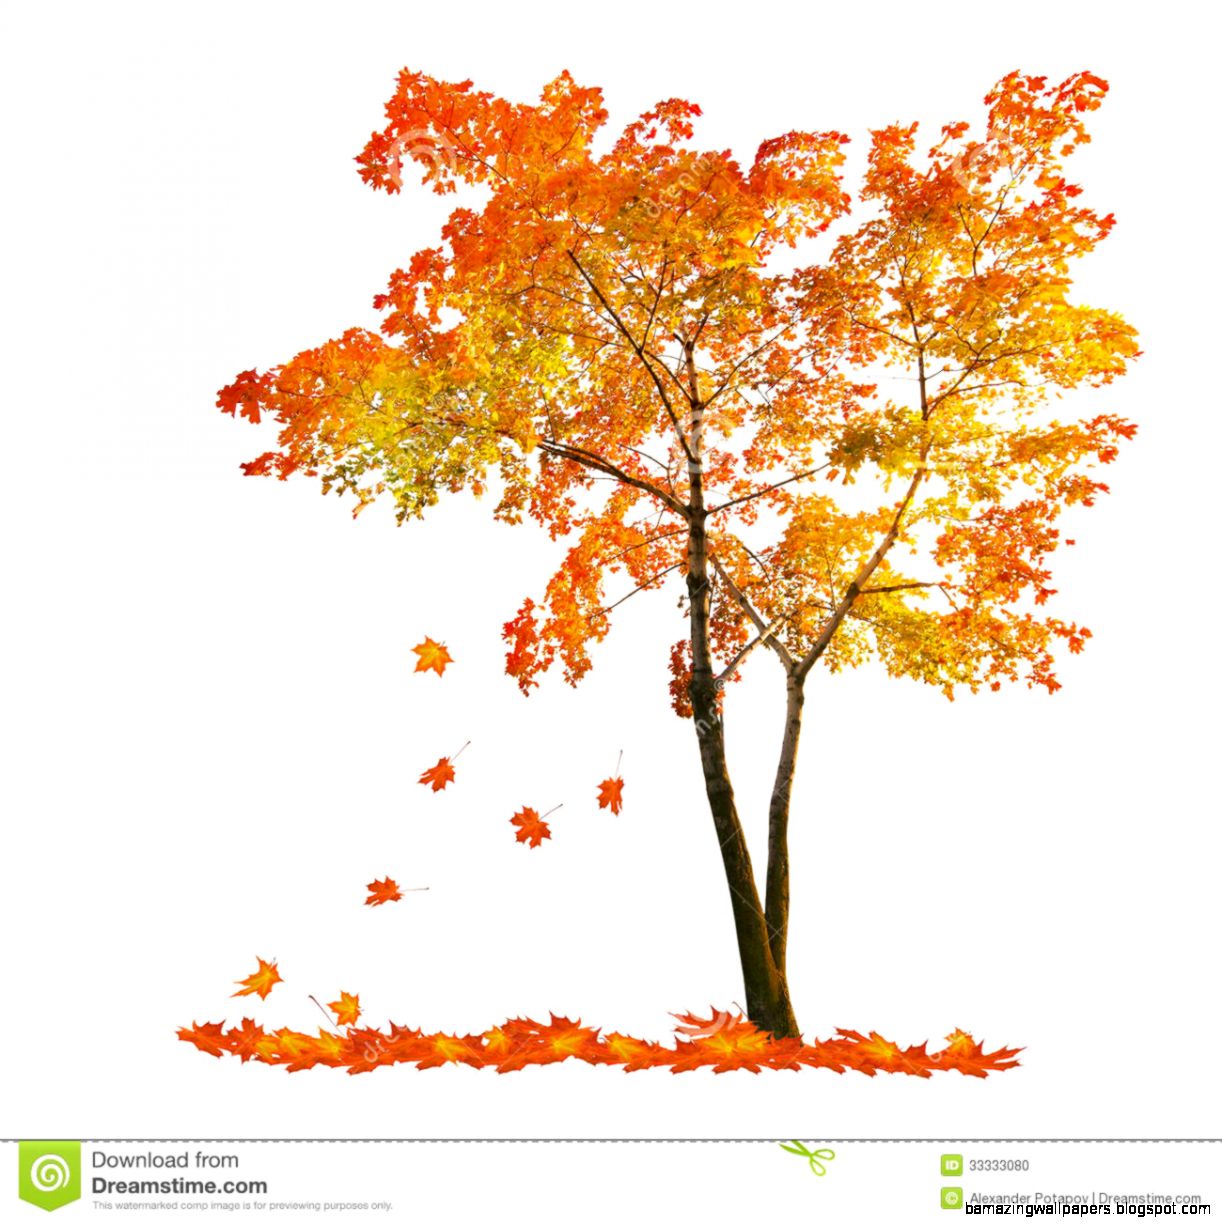 Autumn Leaves Falling From Trees 13 Wallpapers